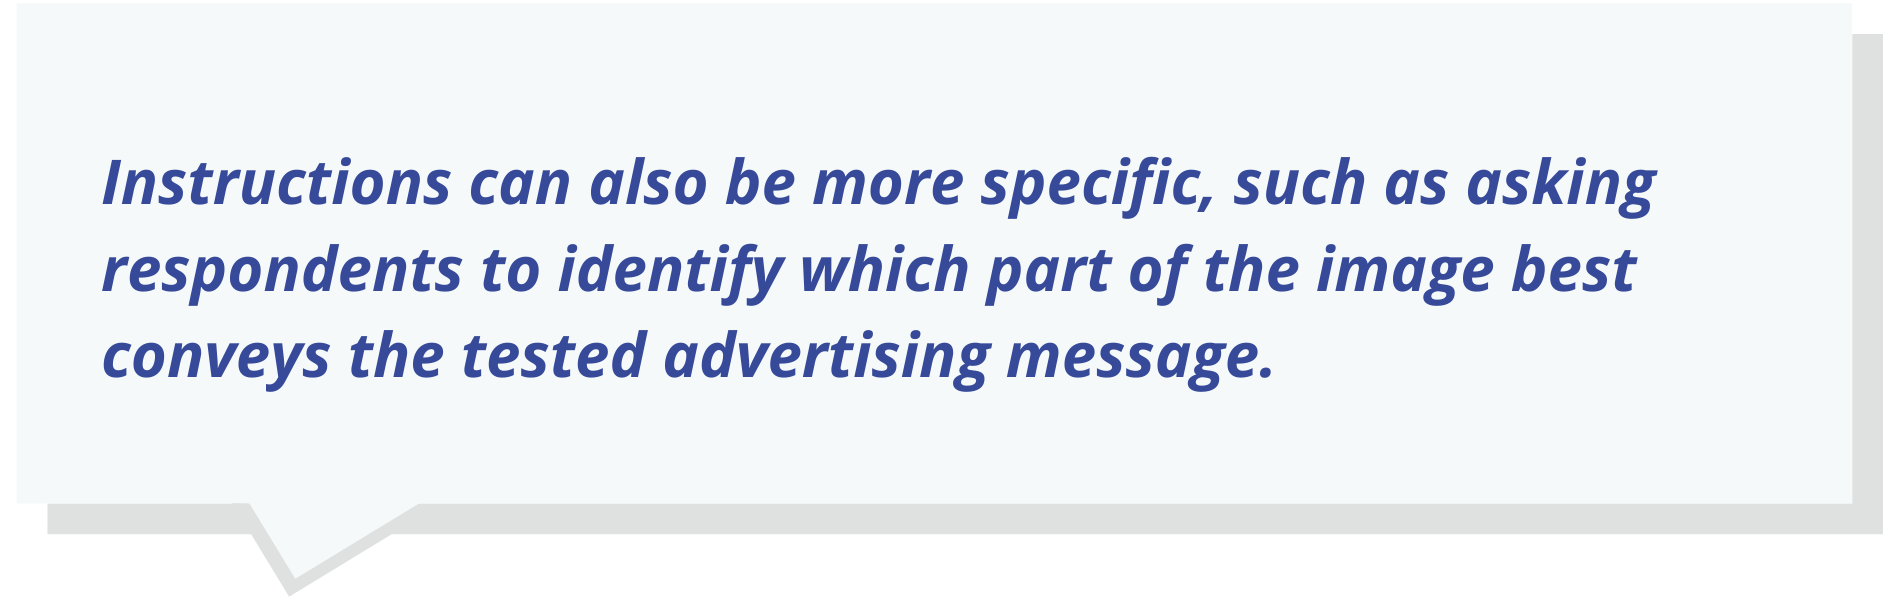 Instructions can also be more specific, such as asking respondents to identify which part of the image best conveys the tested advertising message.